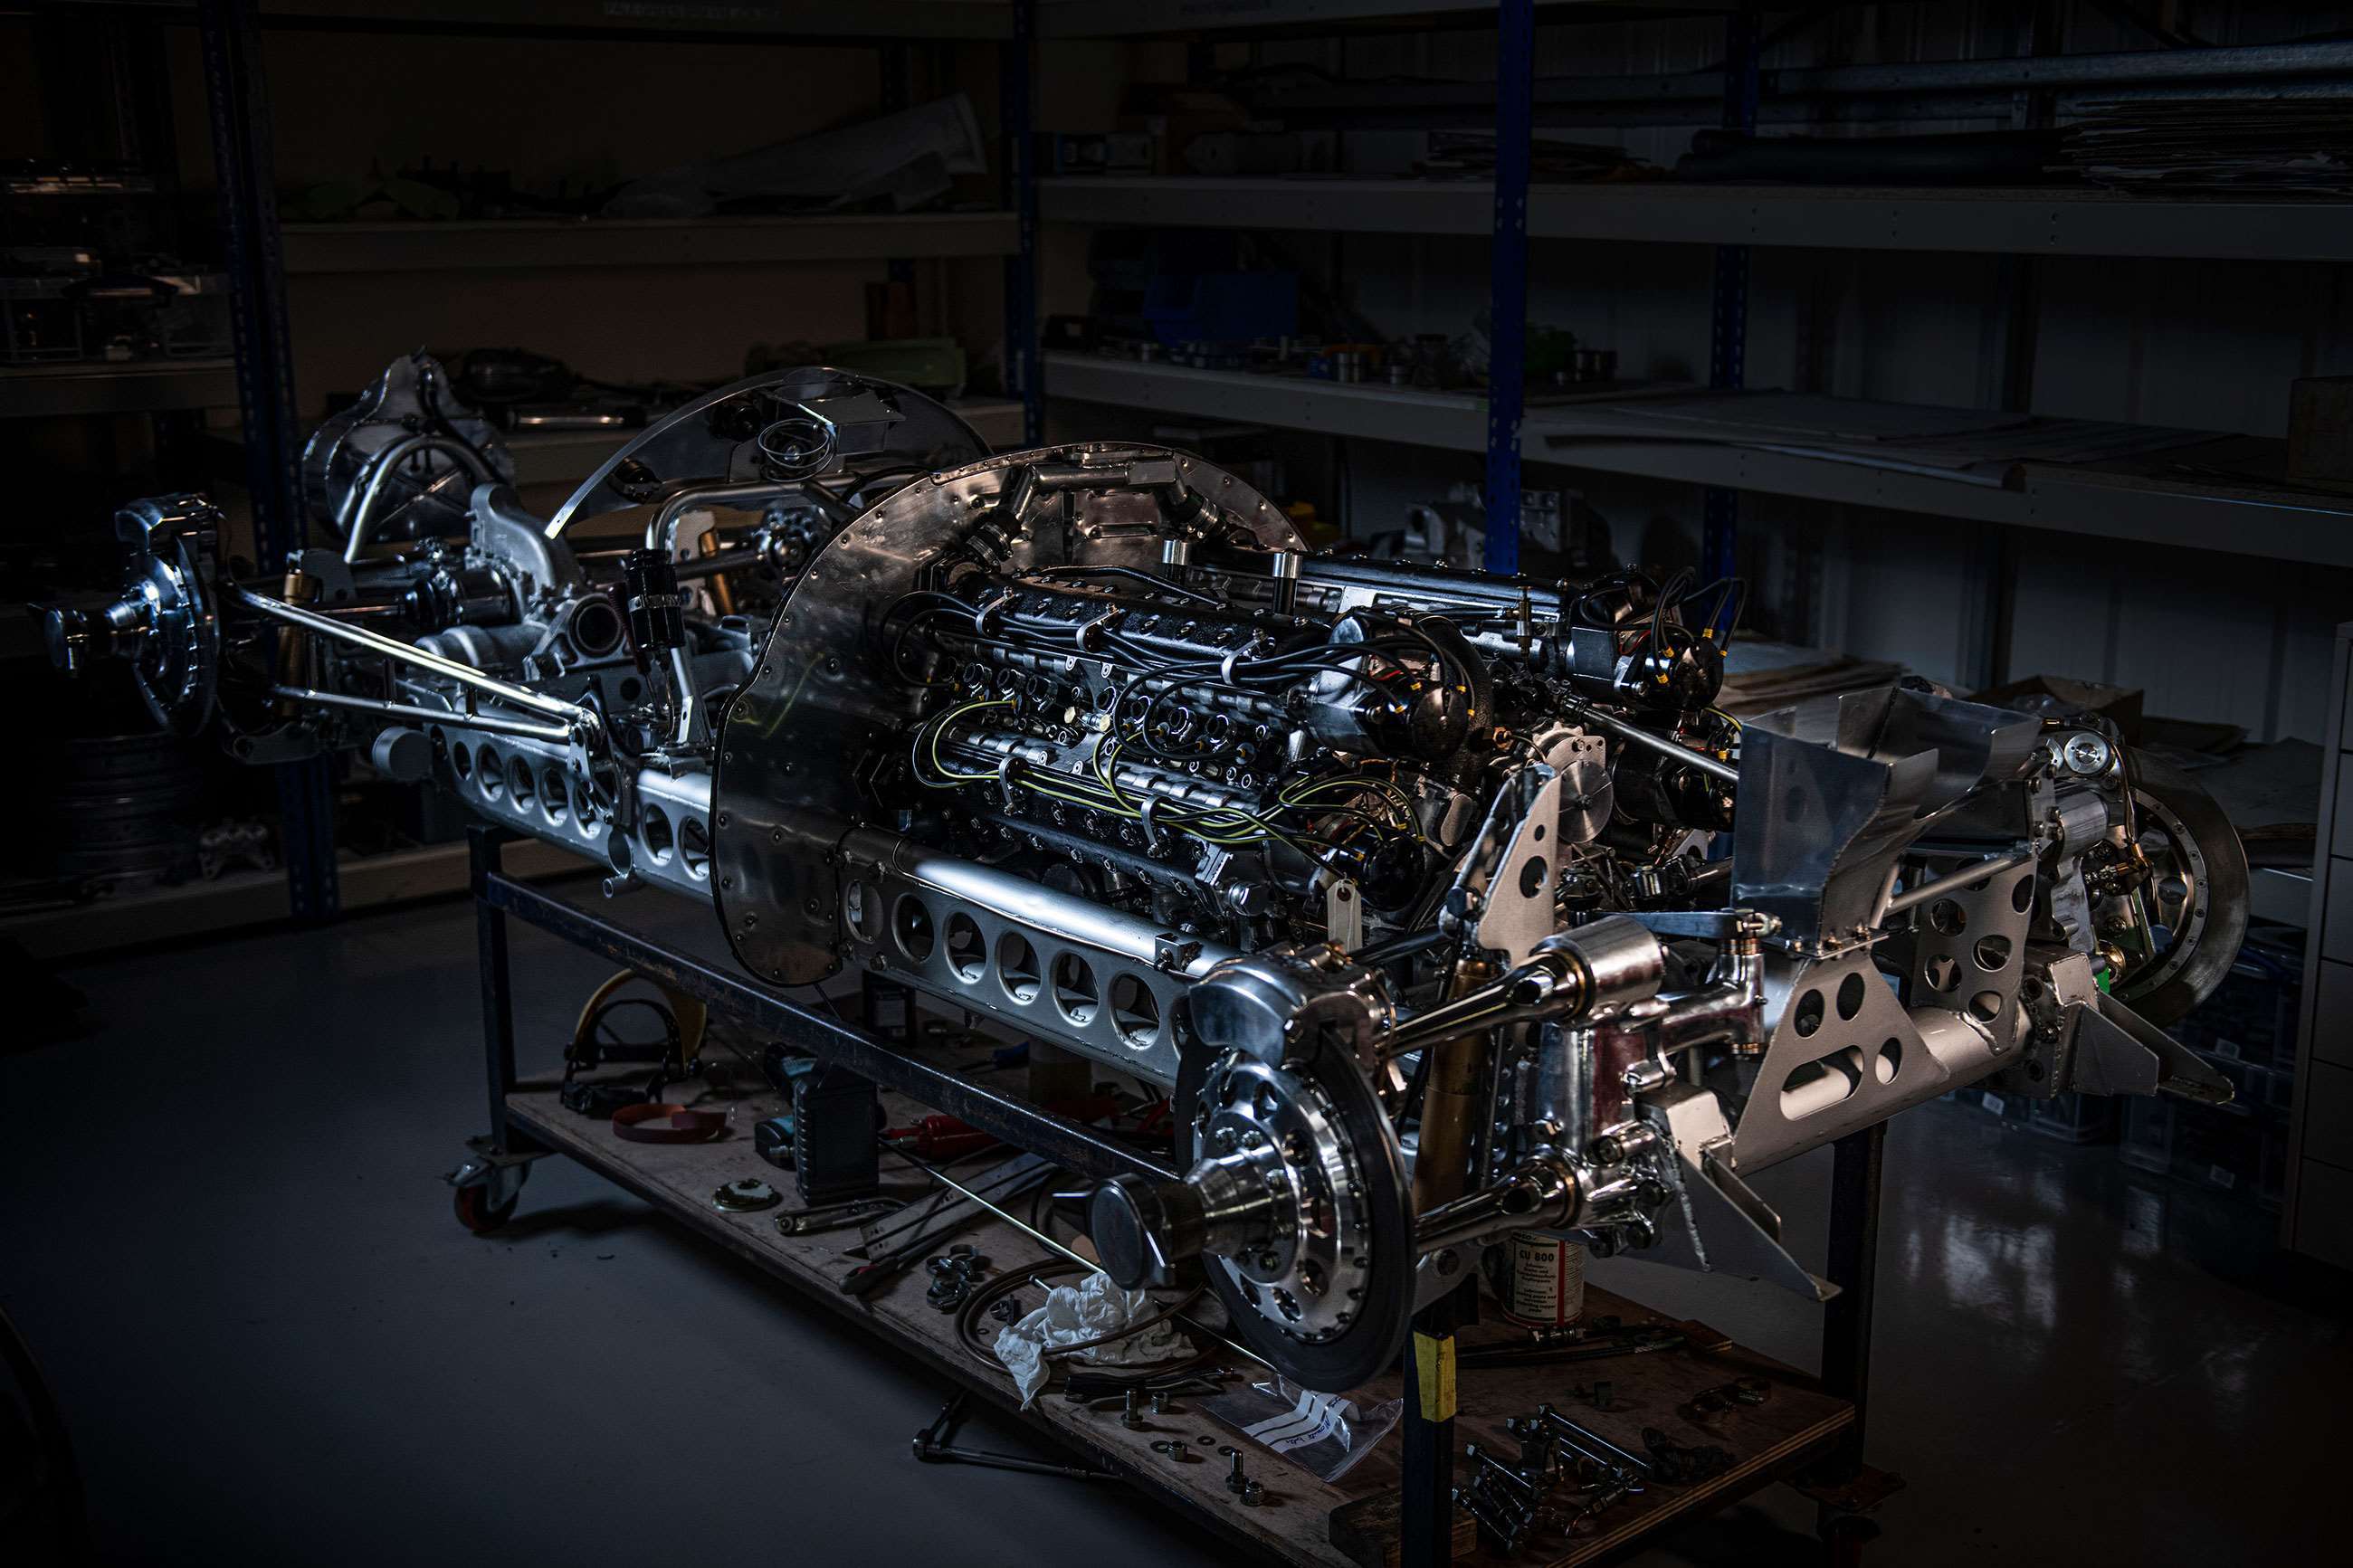 brm-p15-chassis-2-rebuild-revival-festival-of-speed-2021-goodwood-30042021.jpg